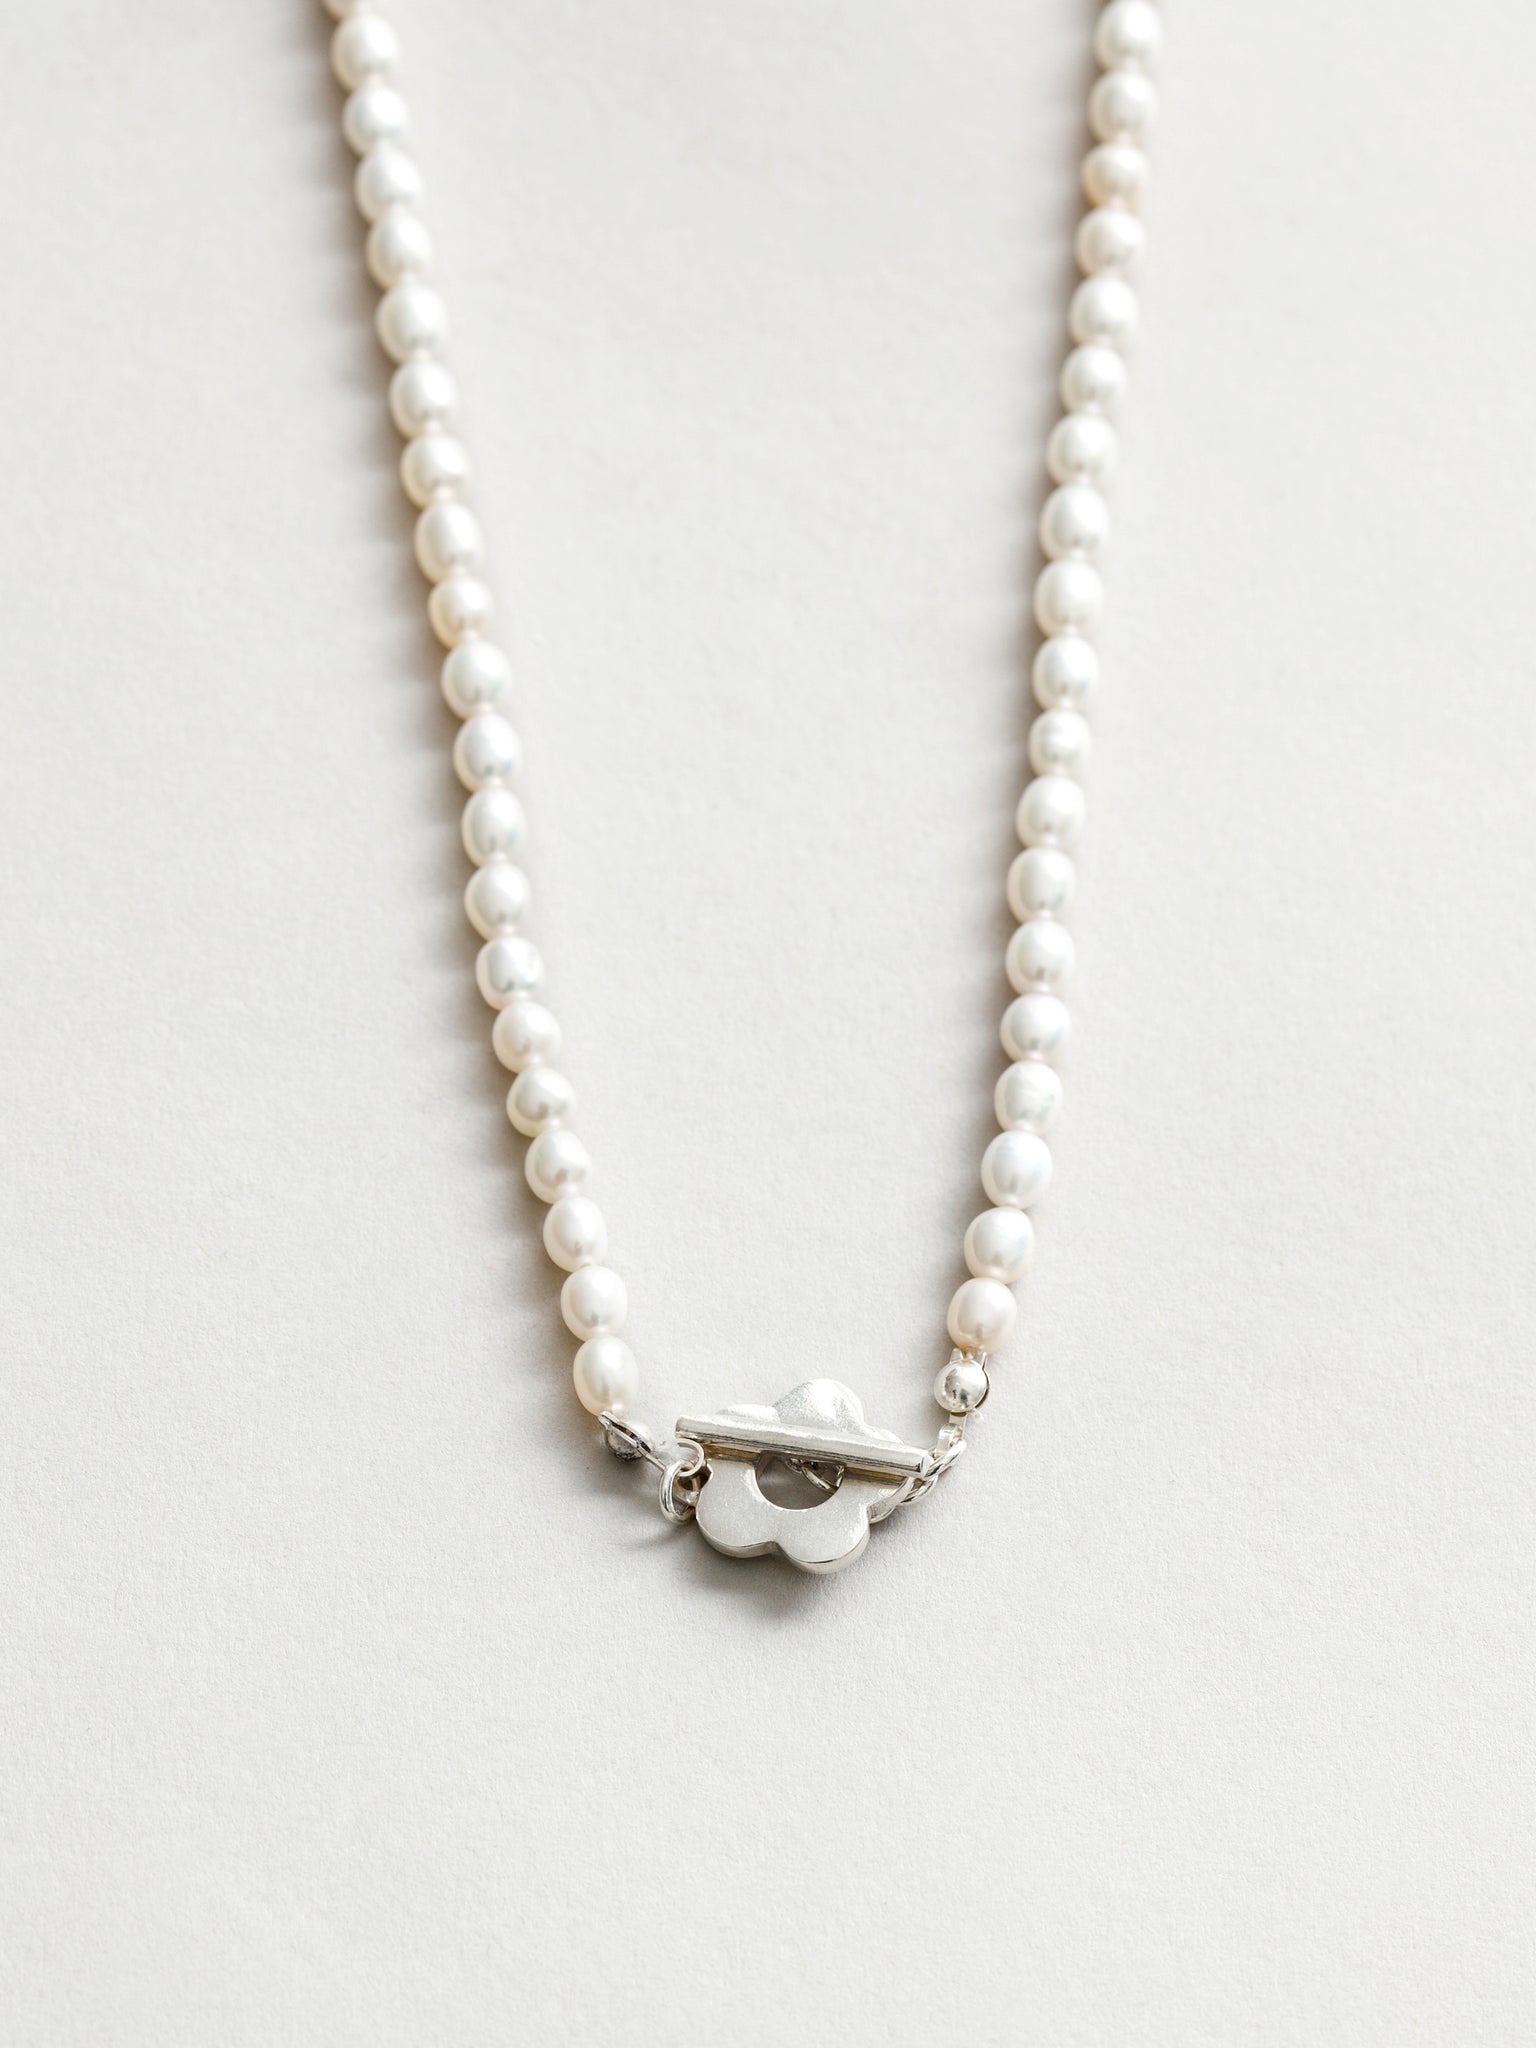 Sofia Pearl Necklace in Sterling Silver